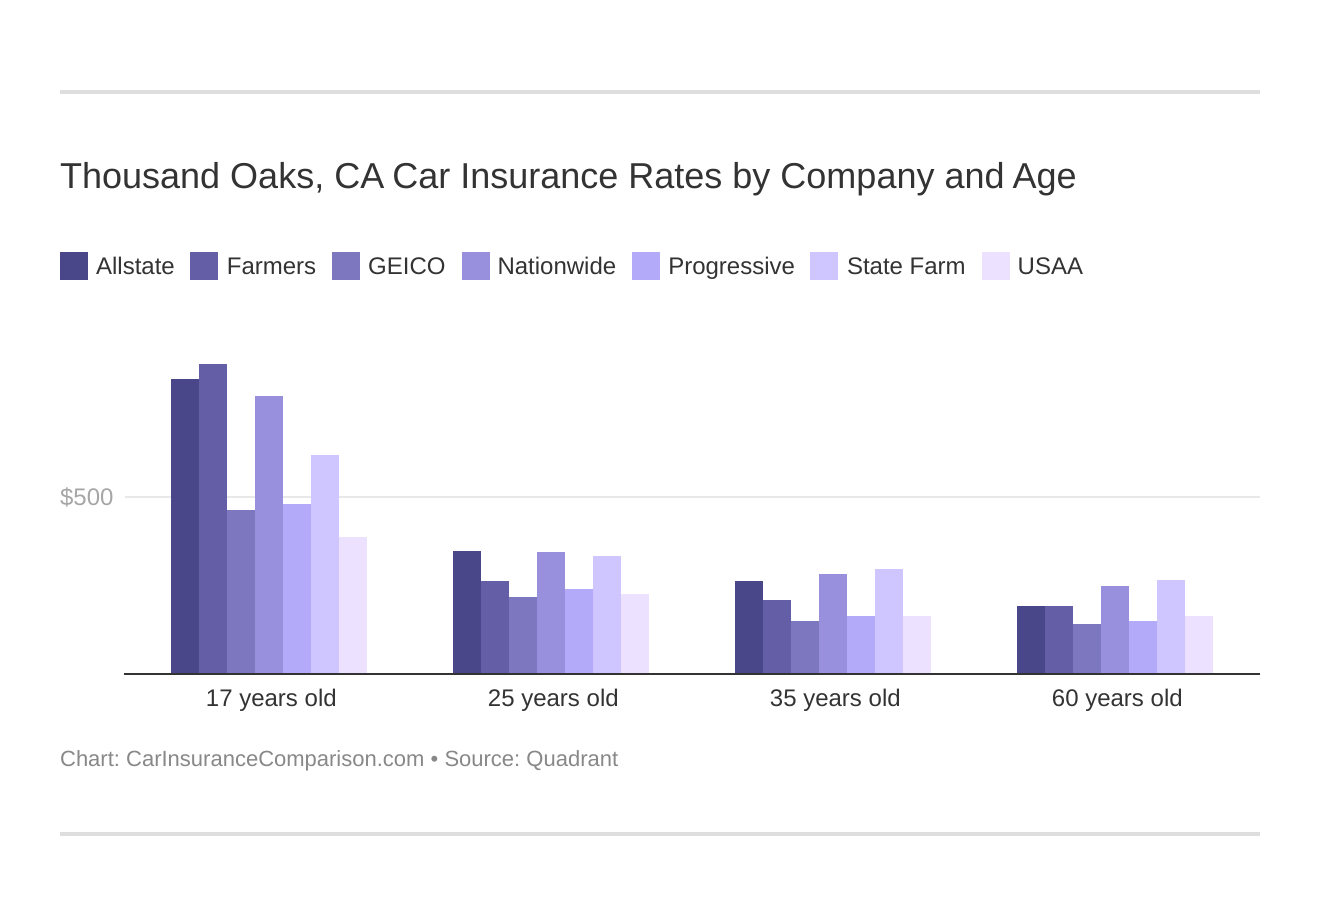 Thousand Oaks, CA Car Insurance Rates by Company and Age